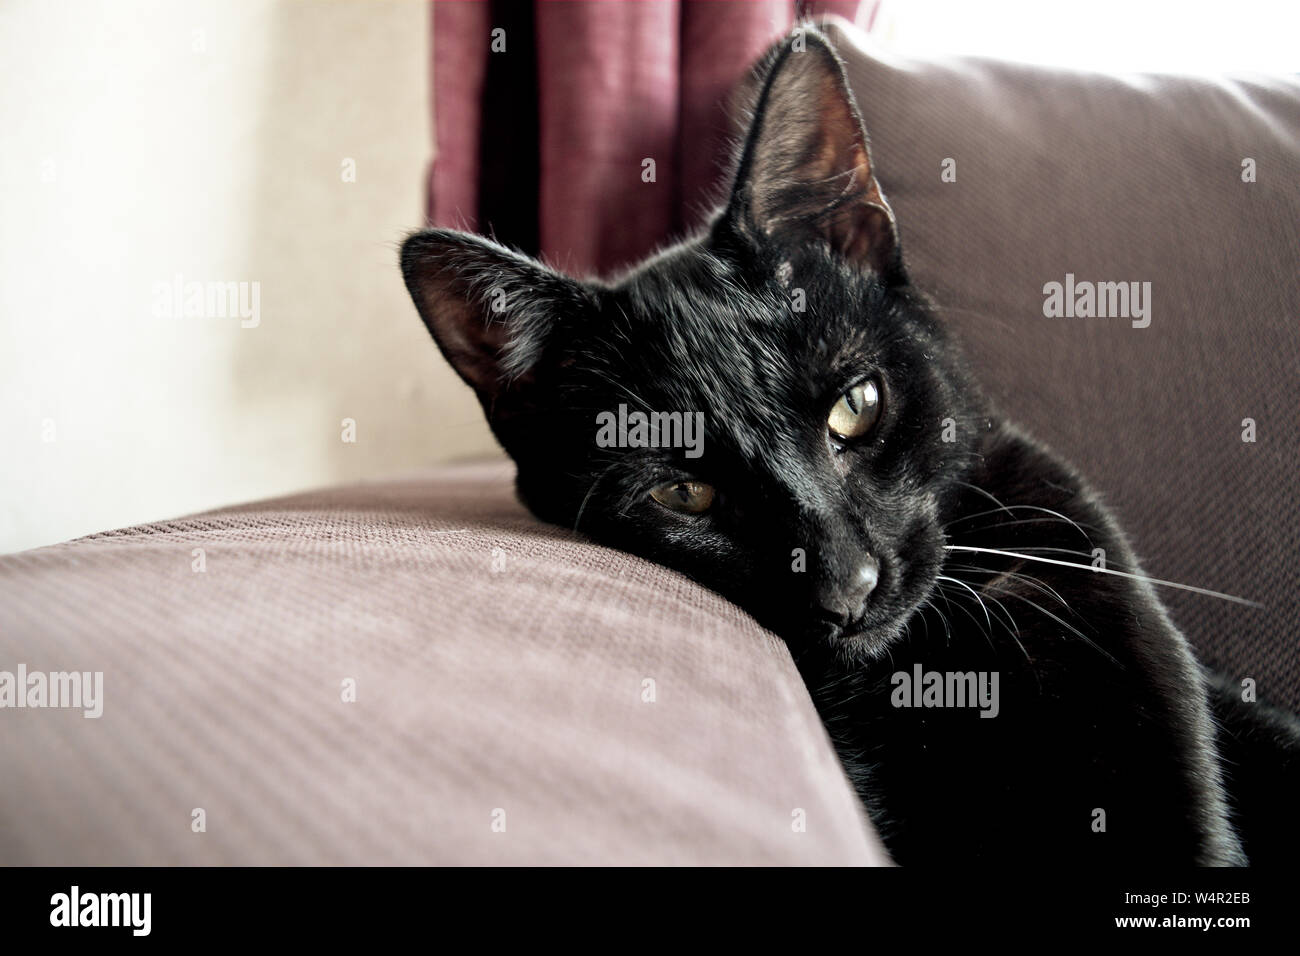 Picture of the sweetest black cat. Curiously, he has one white whisker. This cat is being lazy and lying against an armrest on a sunny afternoon. Stock Photo